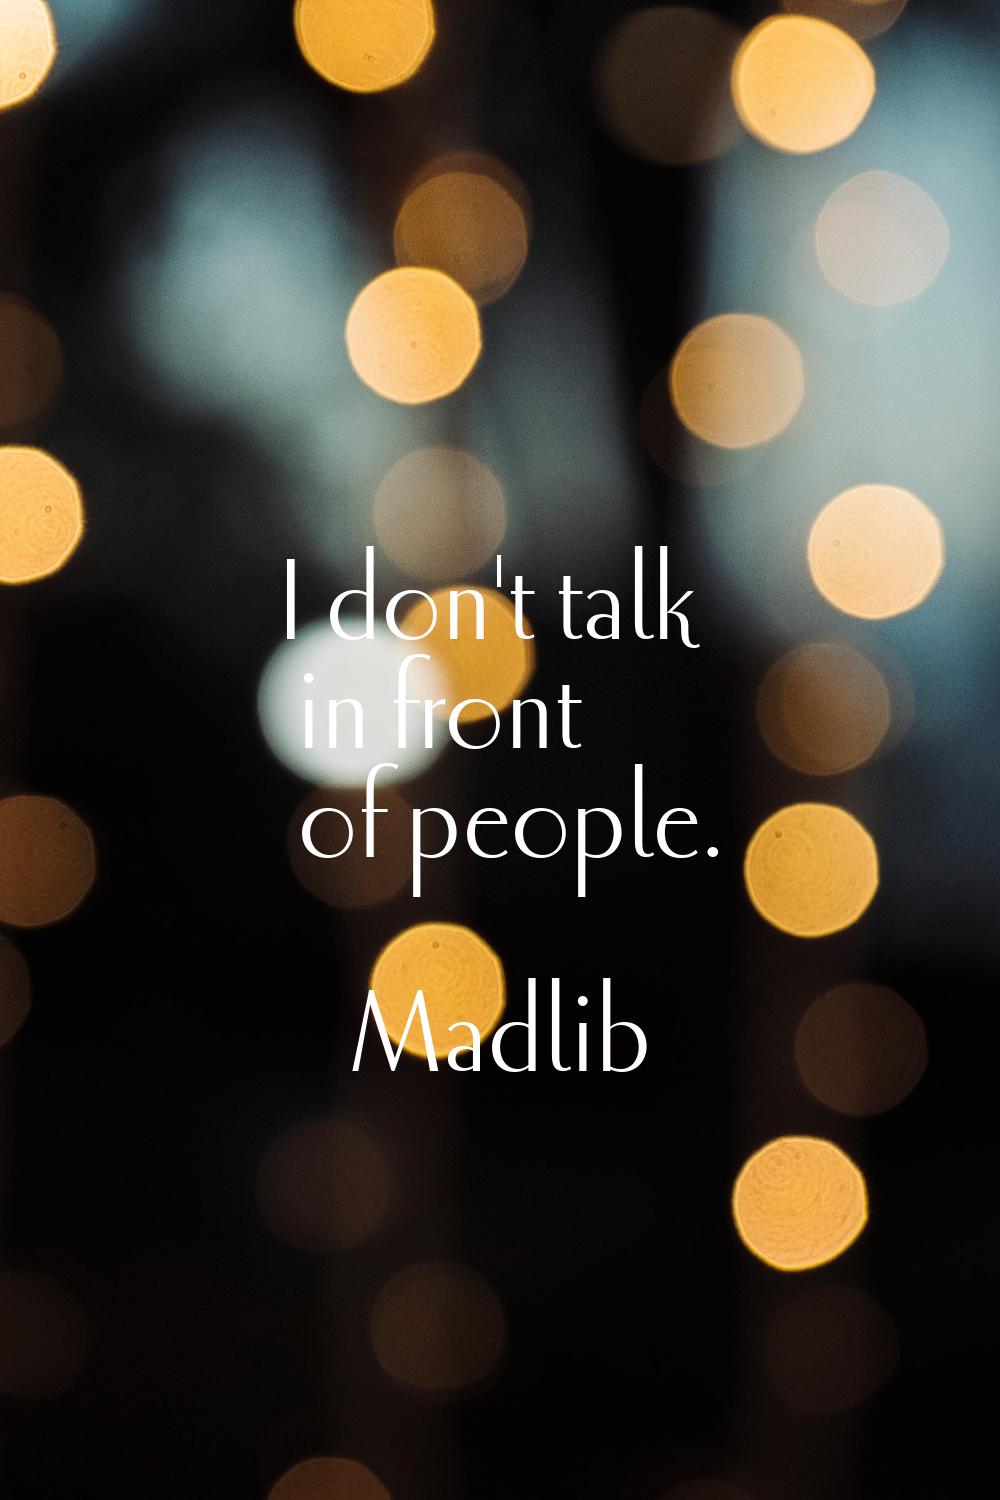 I don't talk in front of people.